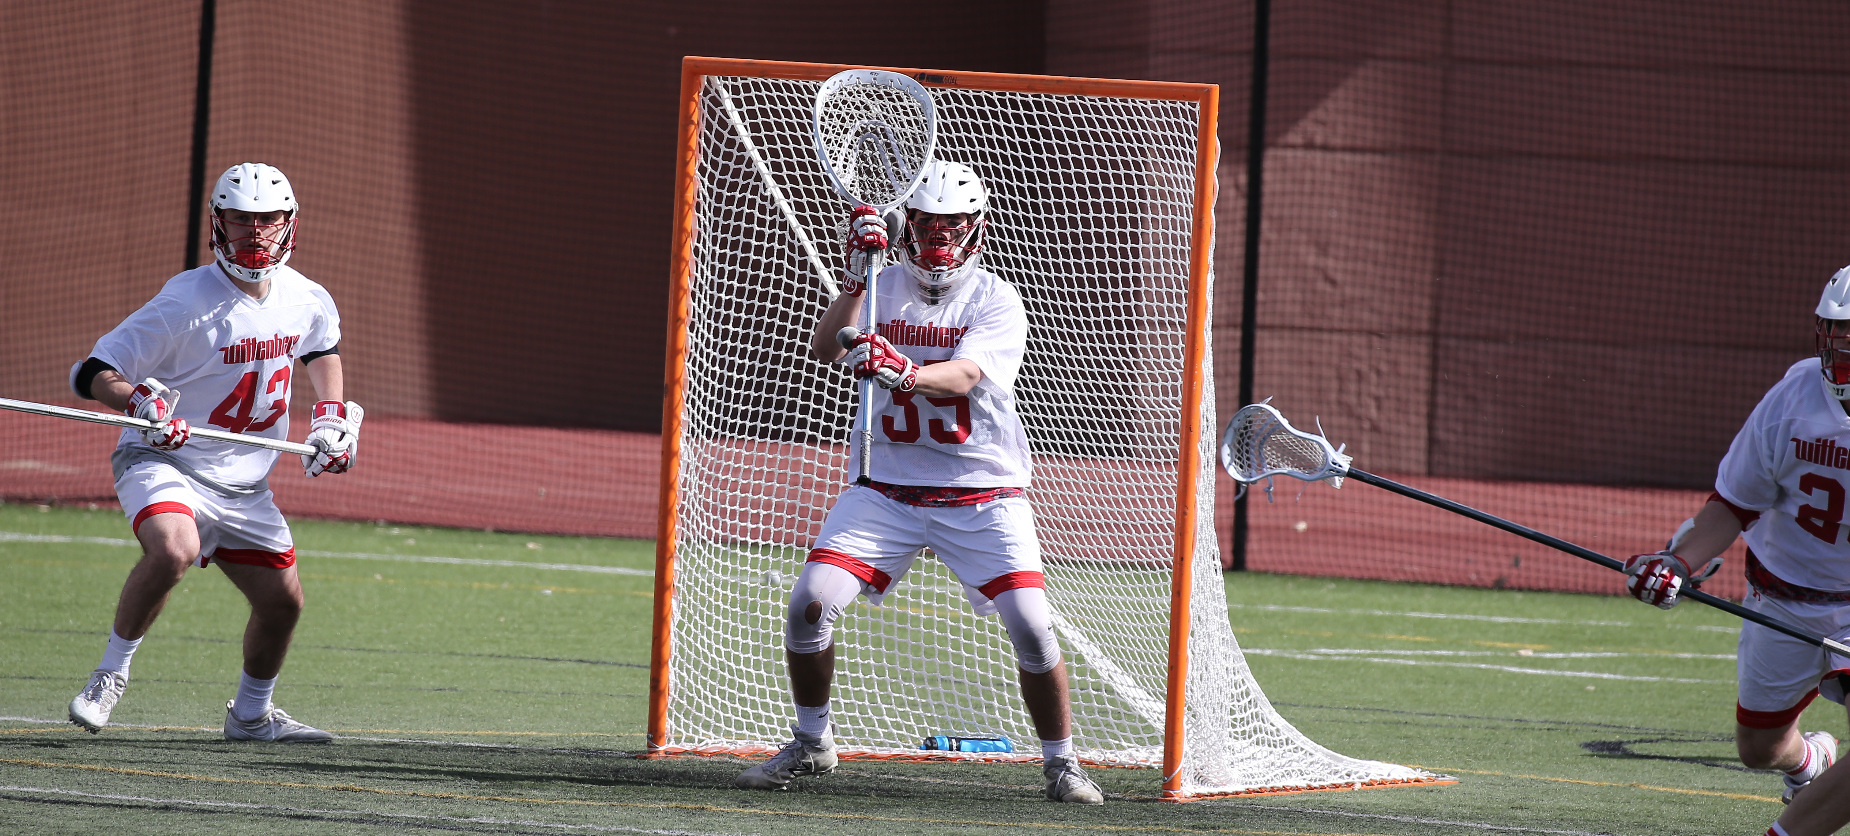 Tigers Open Up NCAC Play with 19-5 Win